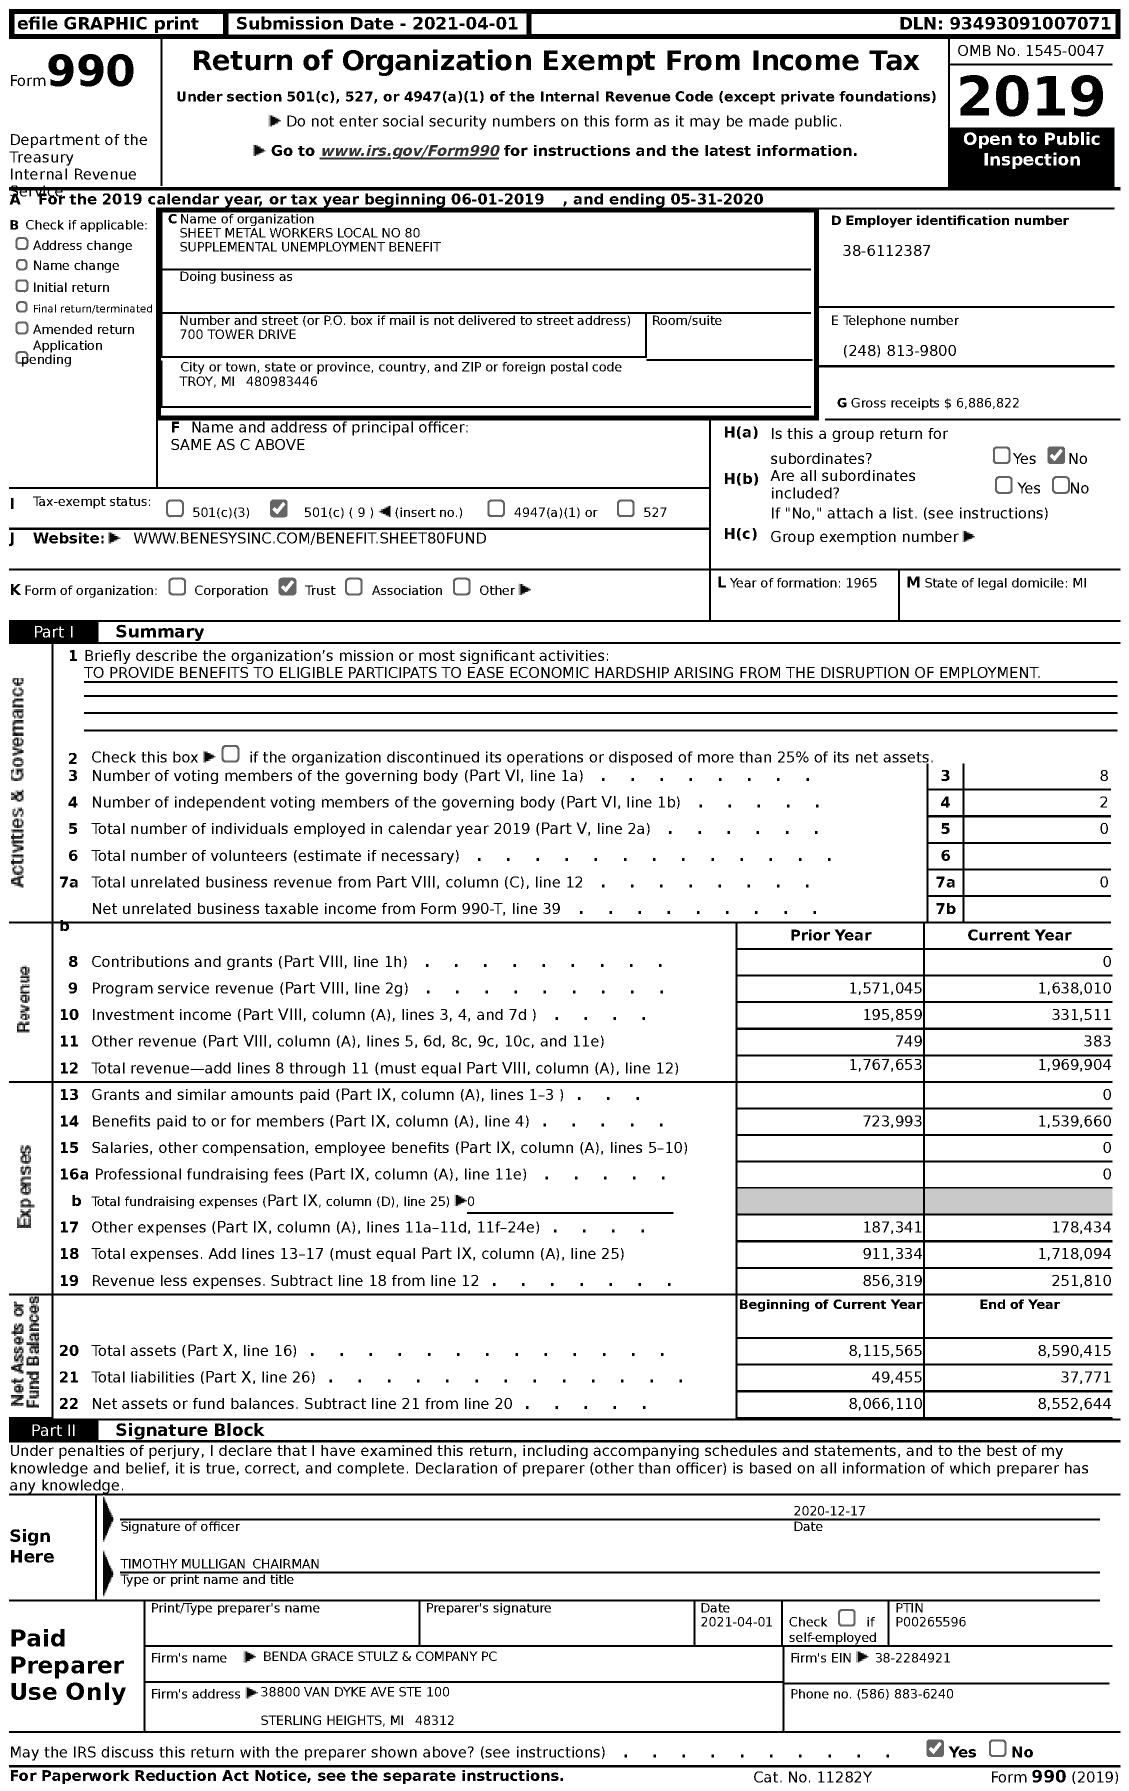 Image of first page of 2019 Form 990 for Sheet Metal Workers Local No 80 Supplemental Unemployment Benefit